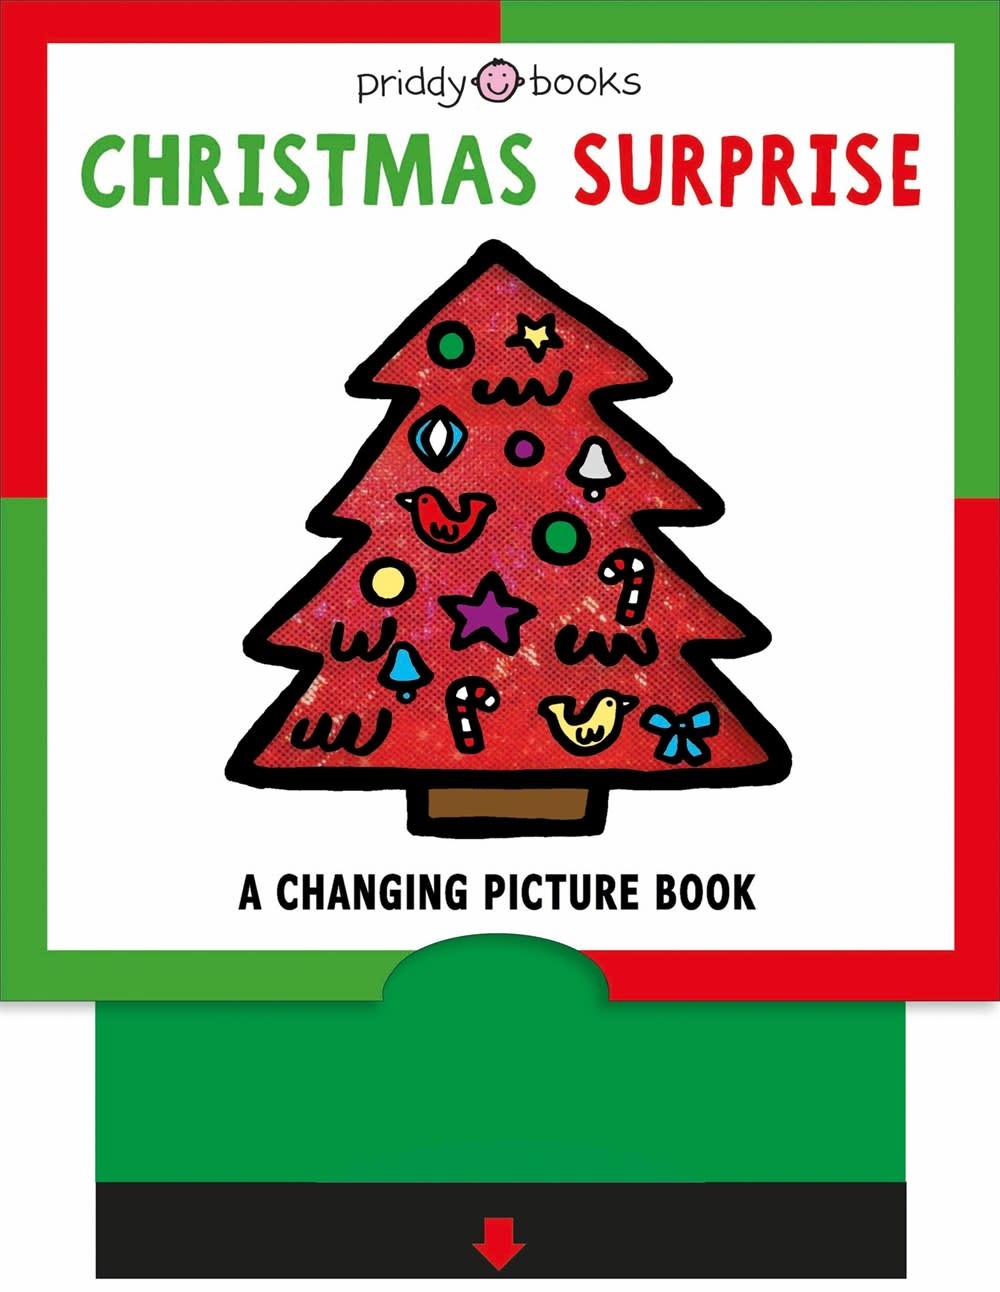 Priddy Books A Changing Picture Book: Christmas Surprise